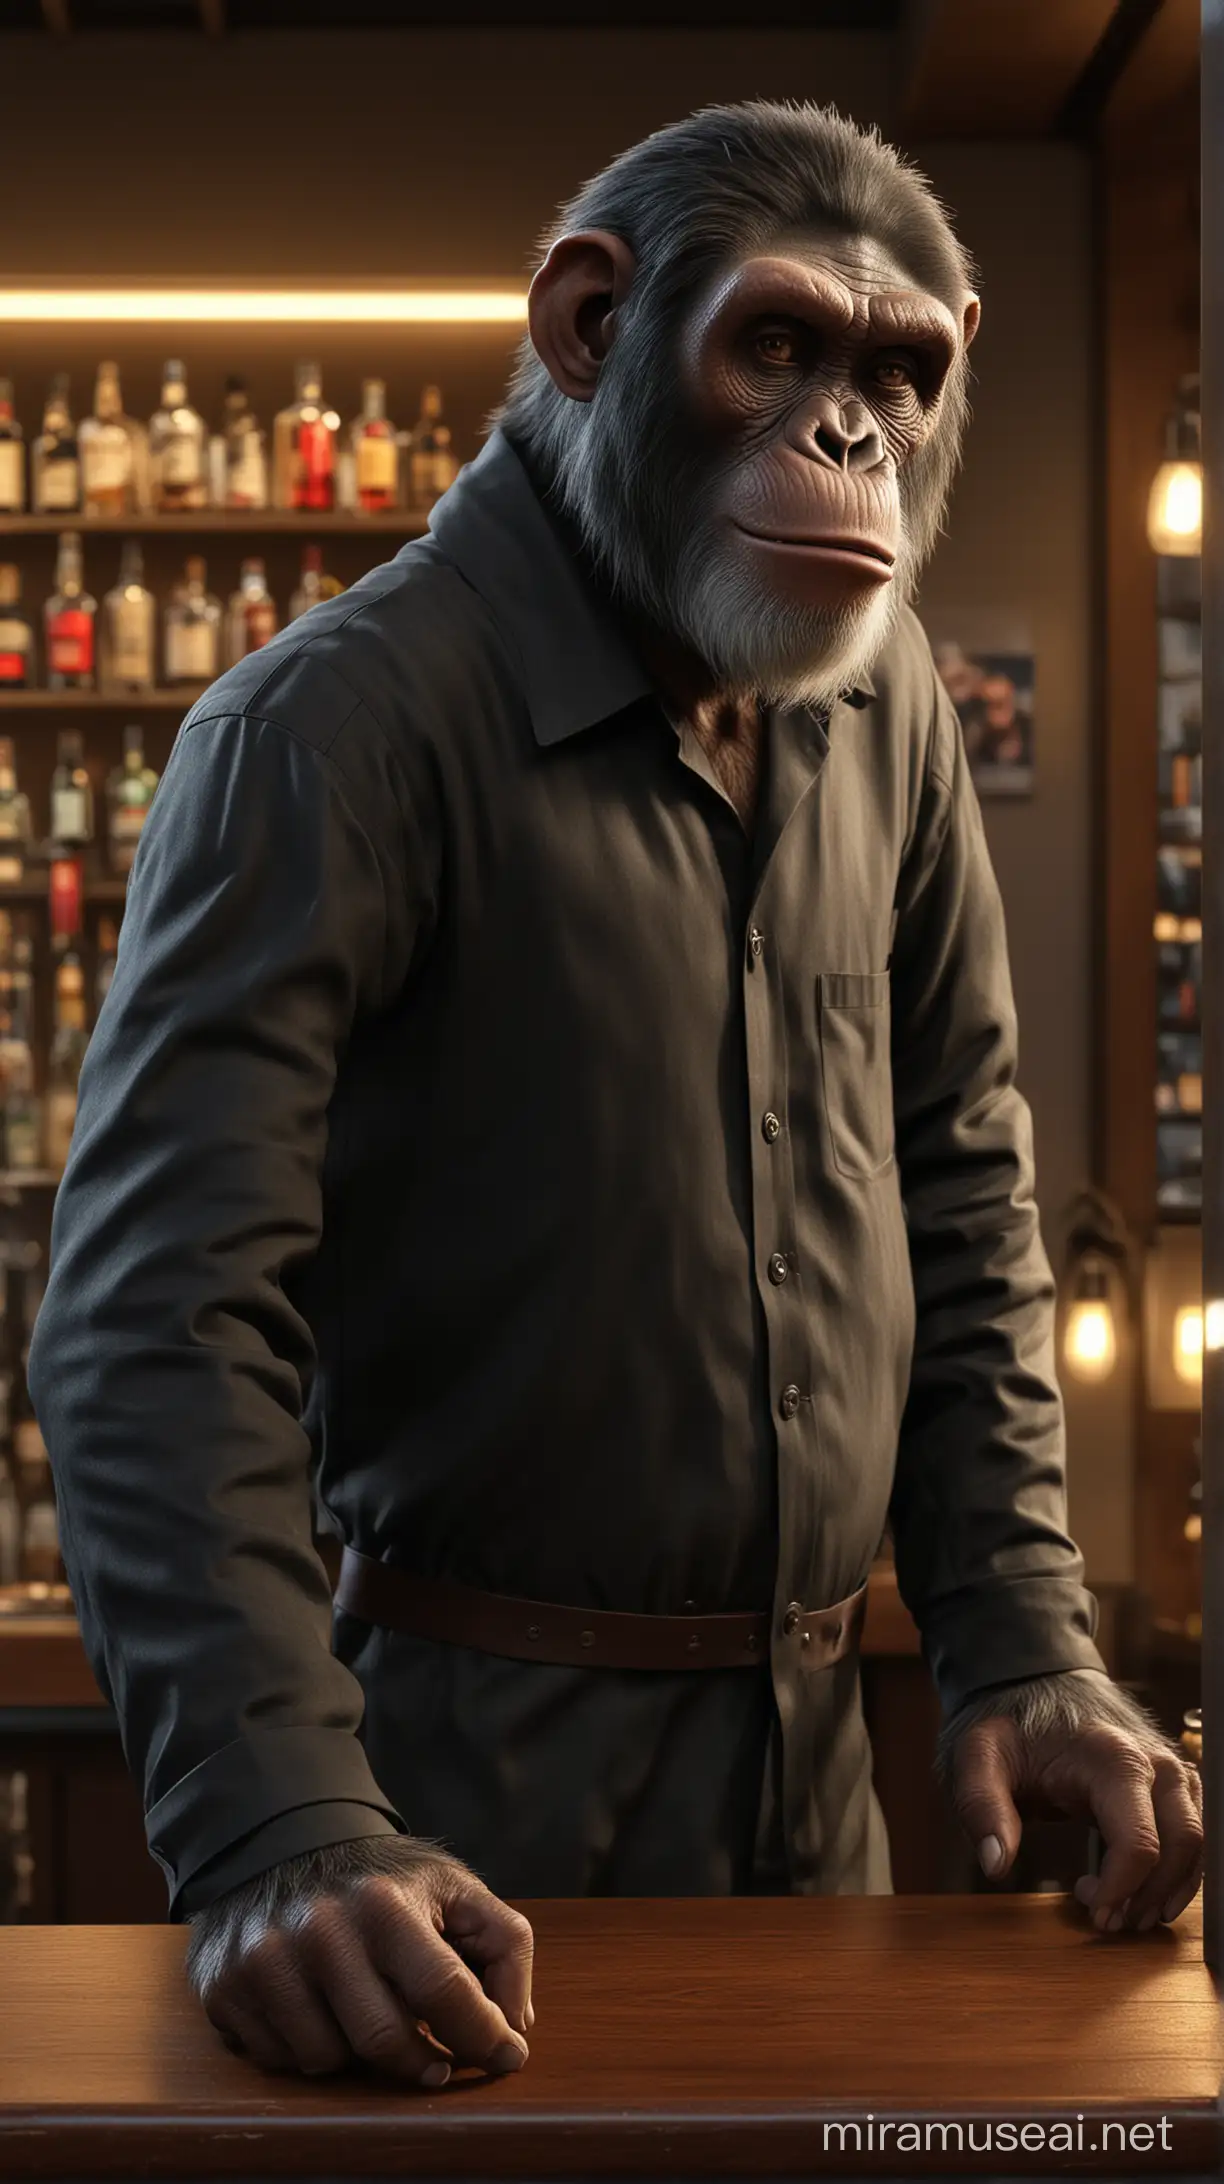 Highly Detail ape as Bar Keeper, Human Pose, modern Style, Realisim, Lights behind, standing